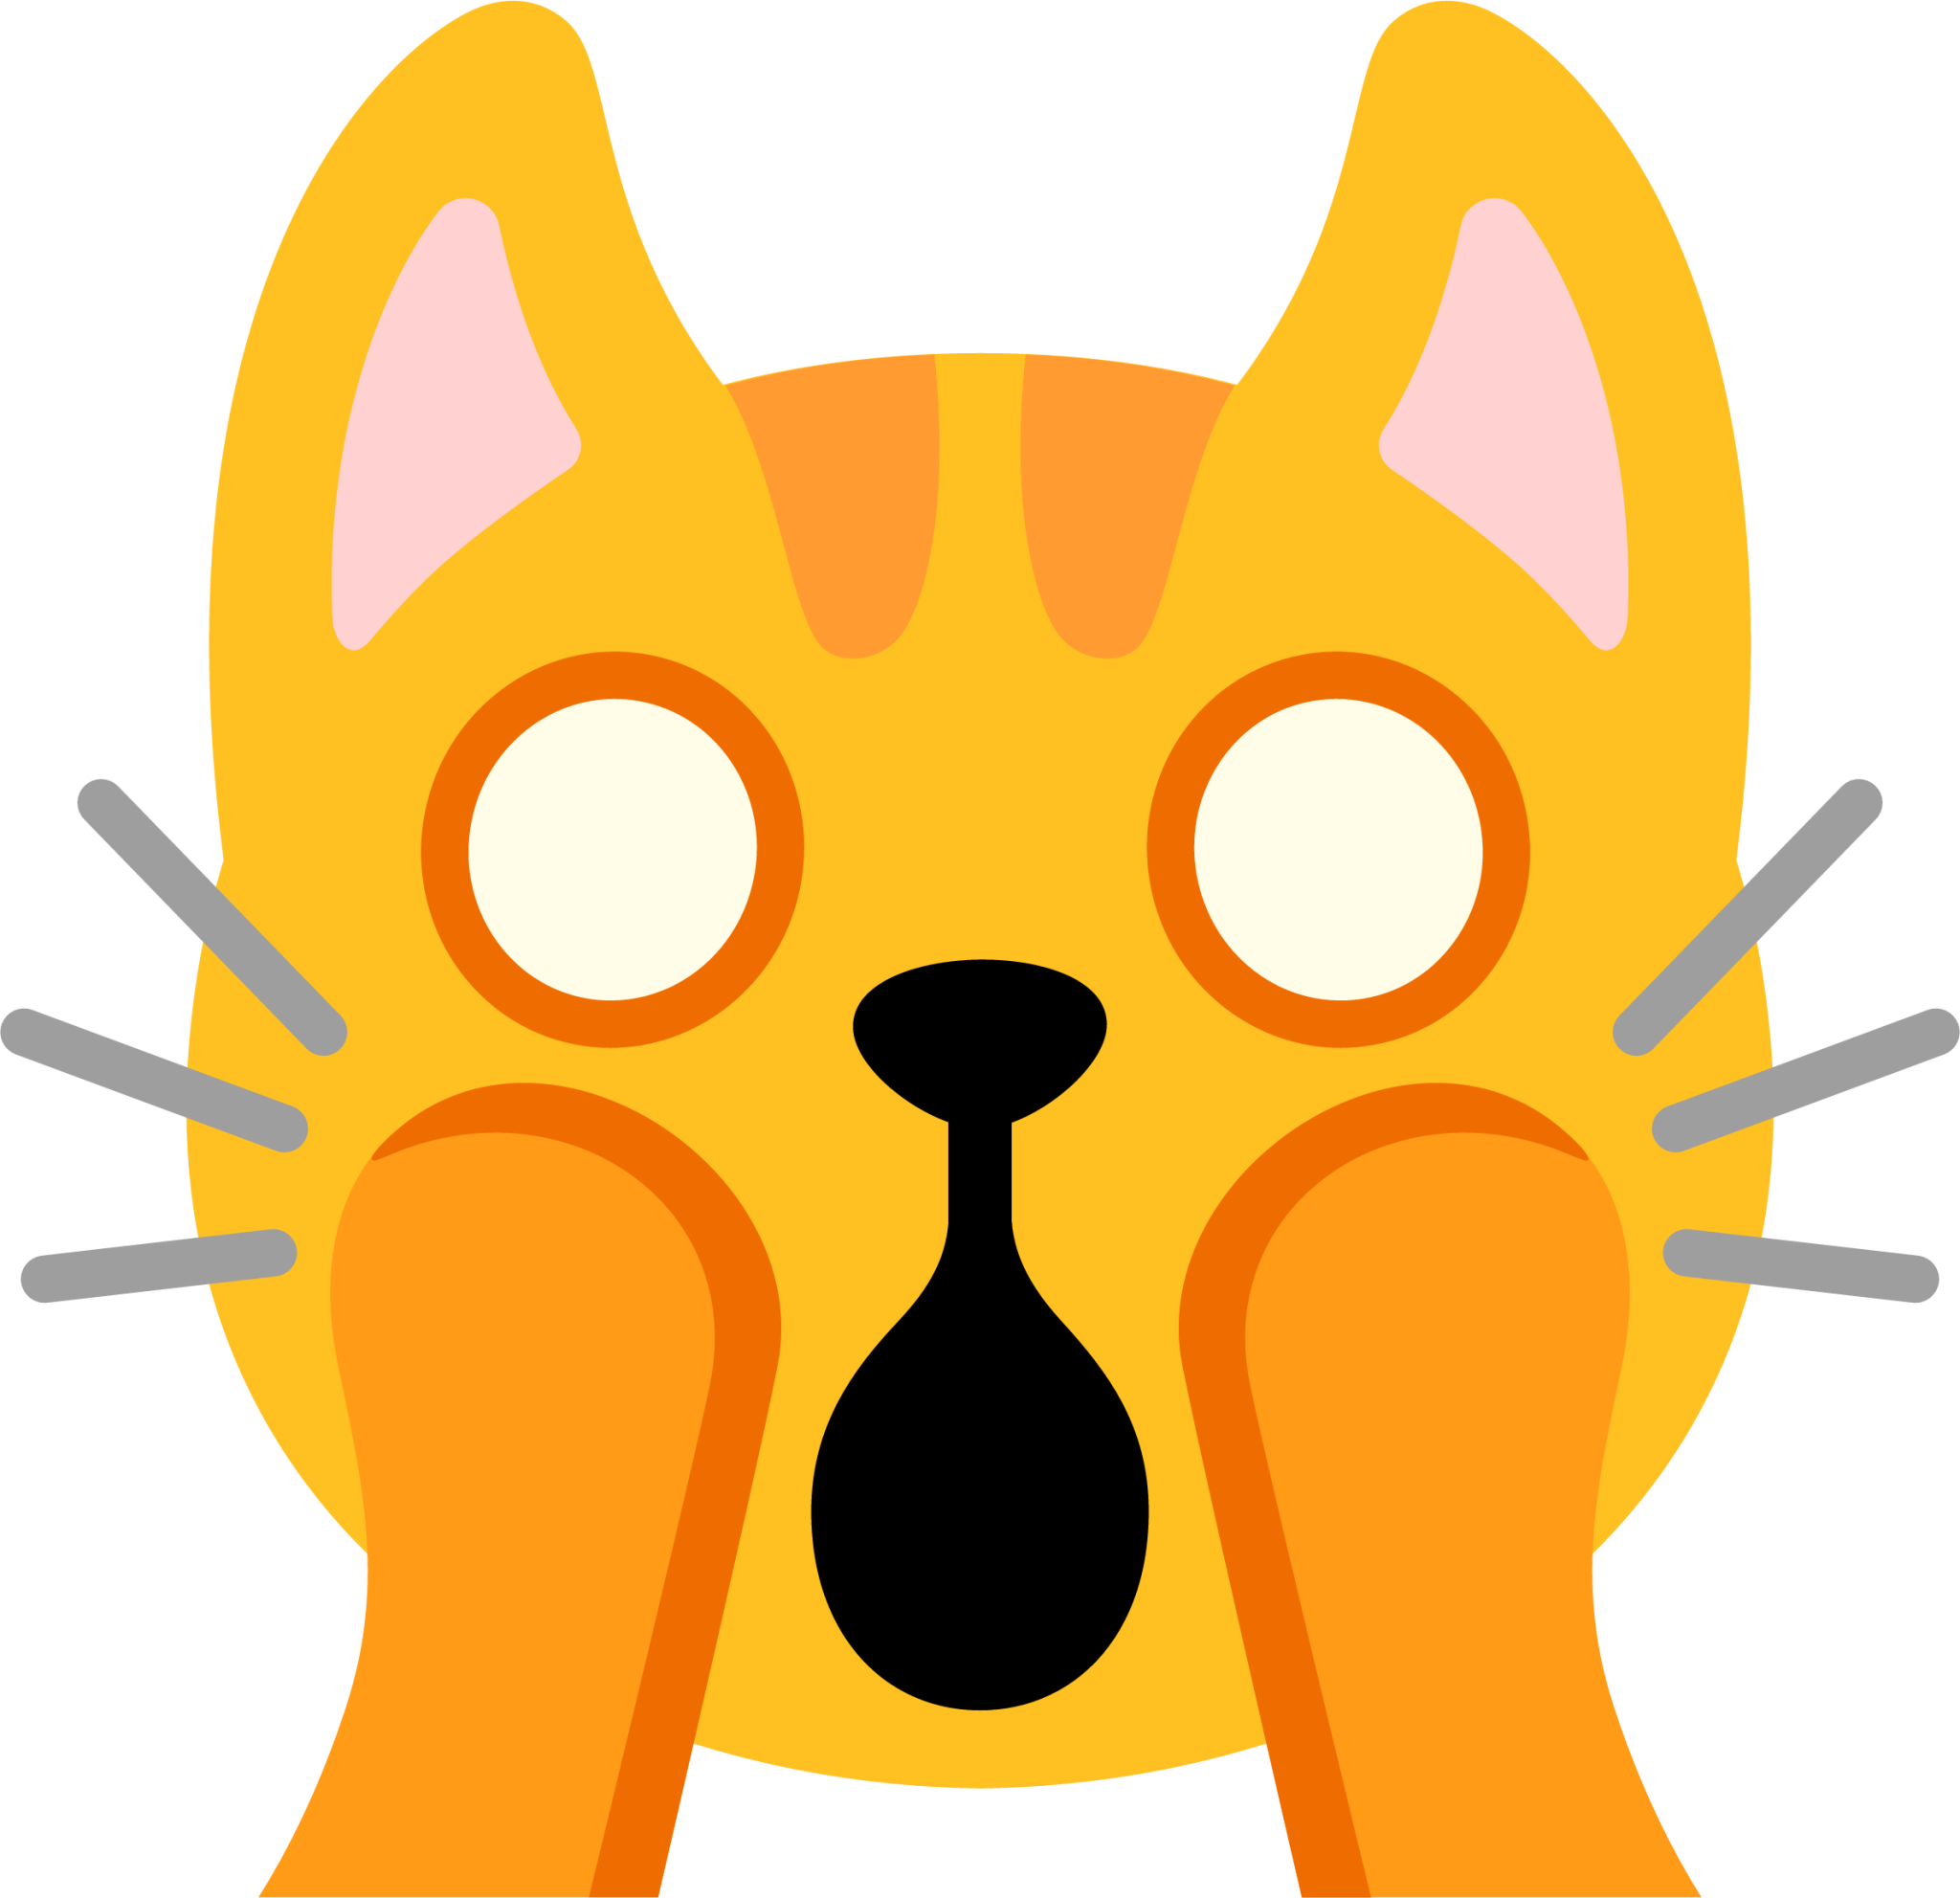 Weary Cat Emoji With Eyes Closed Shared Onlines Royalty Free SVG, Cliparts,  Vectors, and Stock Illustration. Image 178775863.